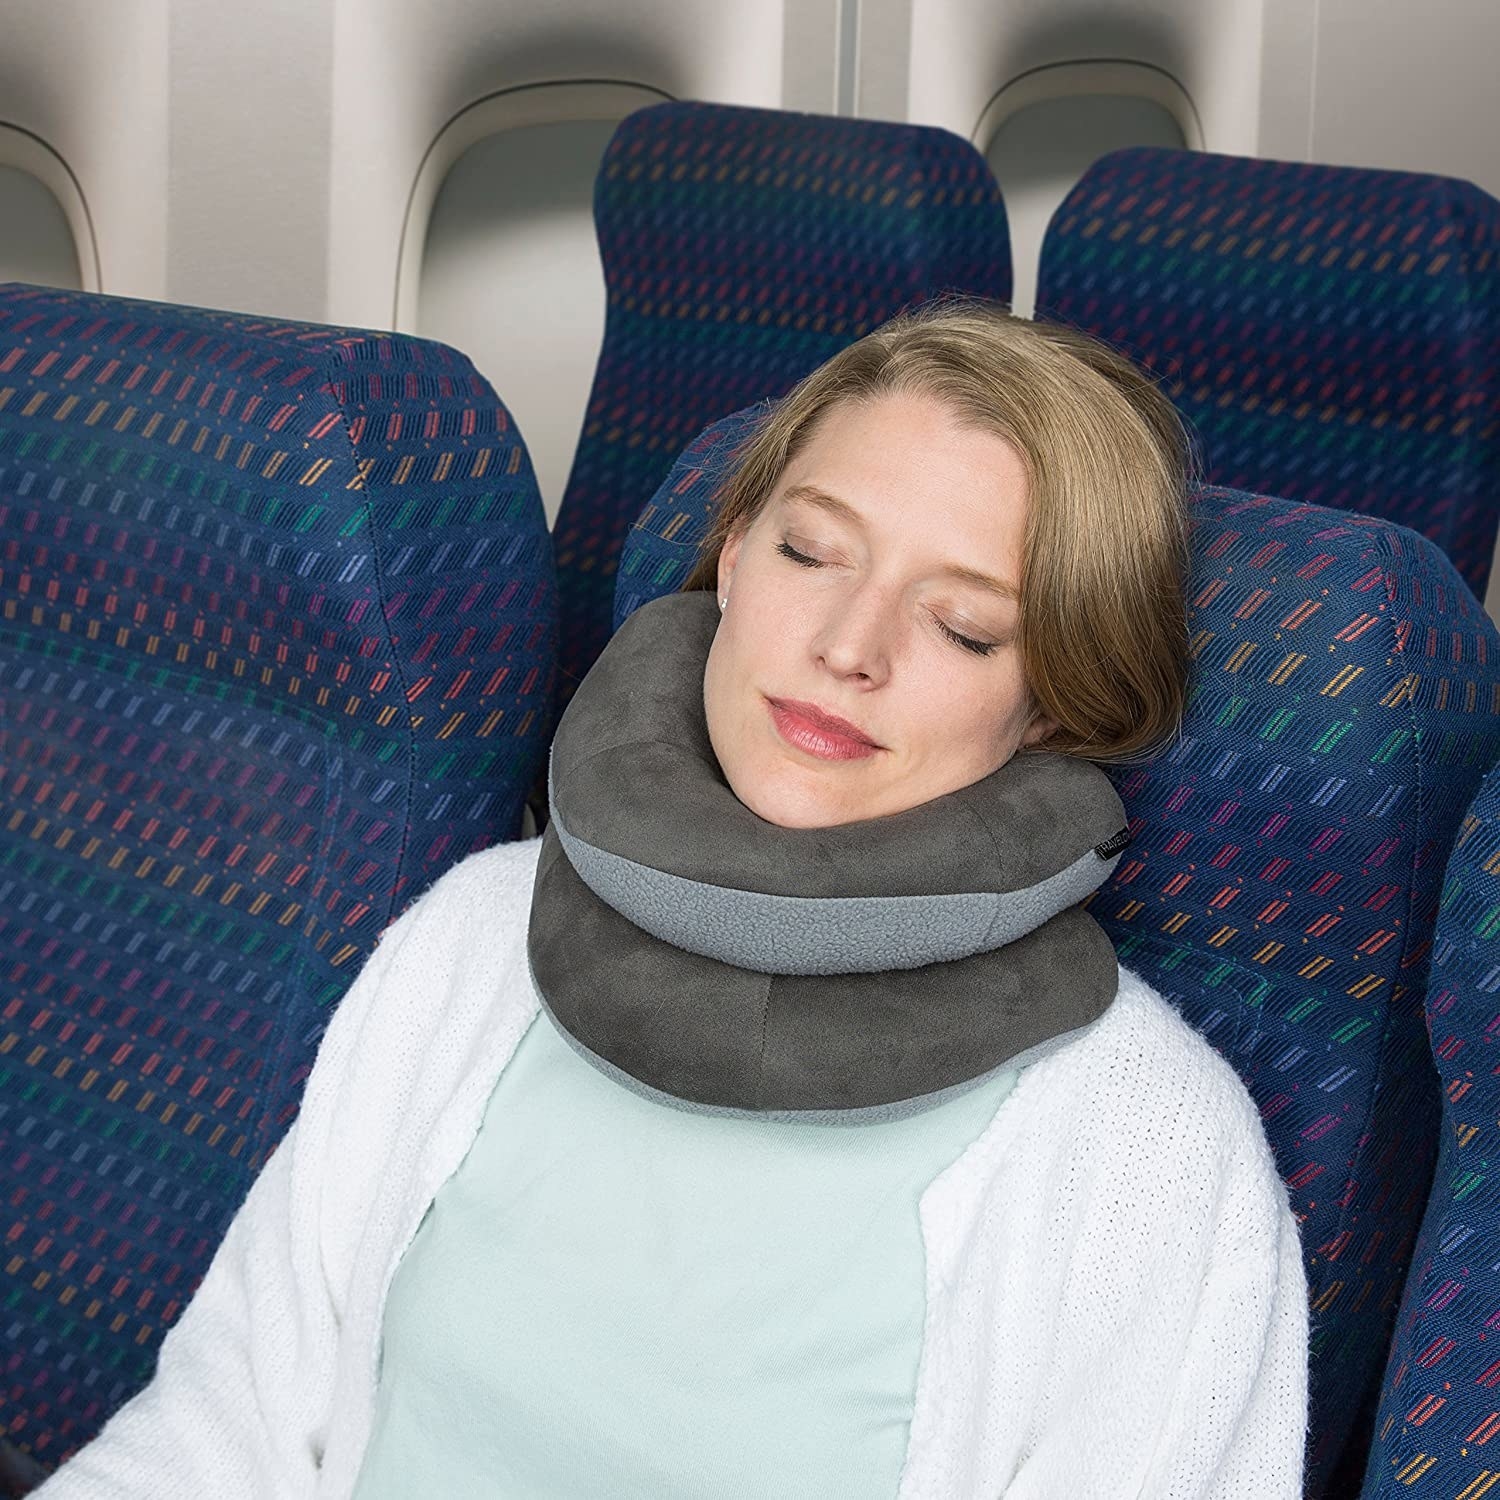 Model using the travel pillow on a plane, wrapping it to give maximum support